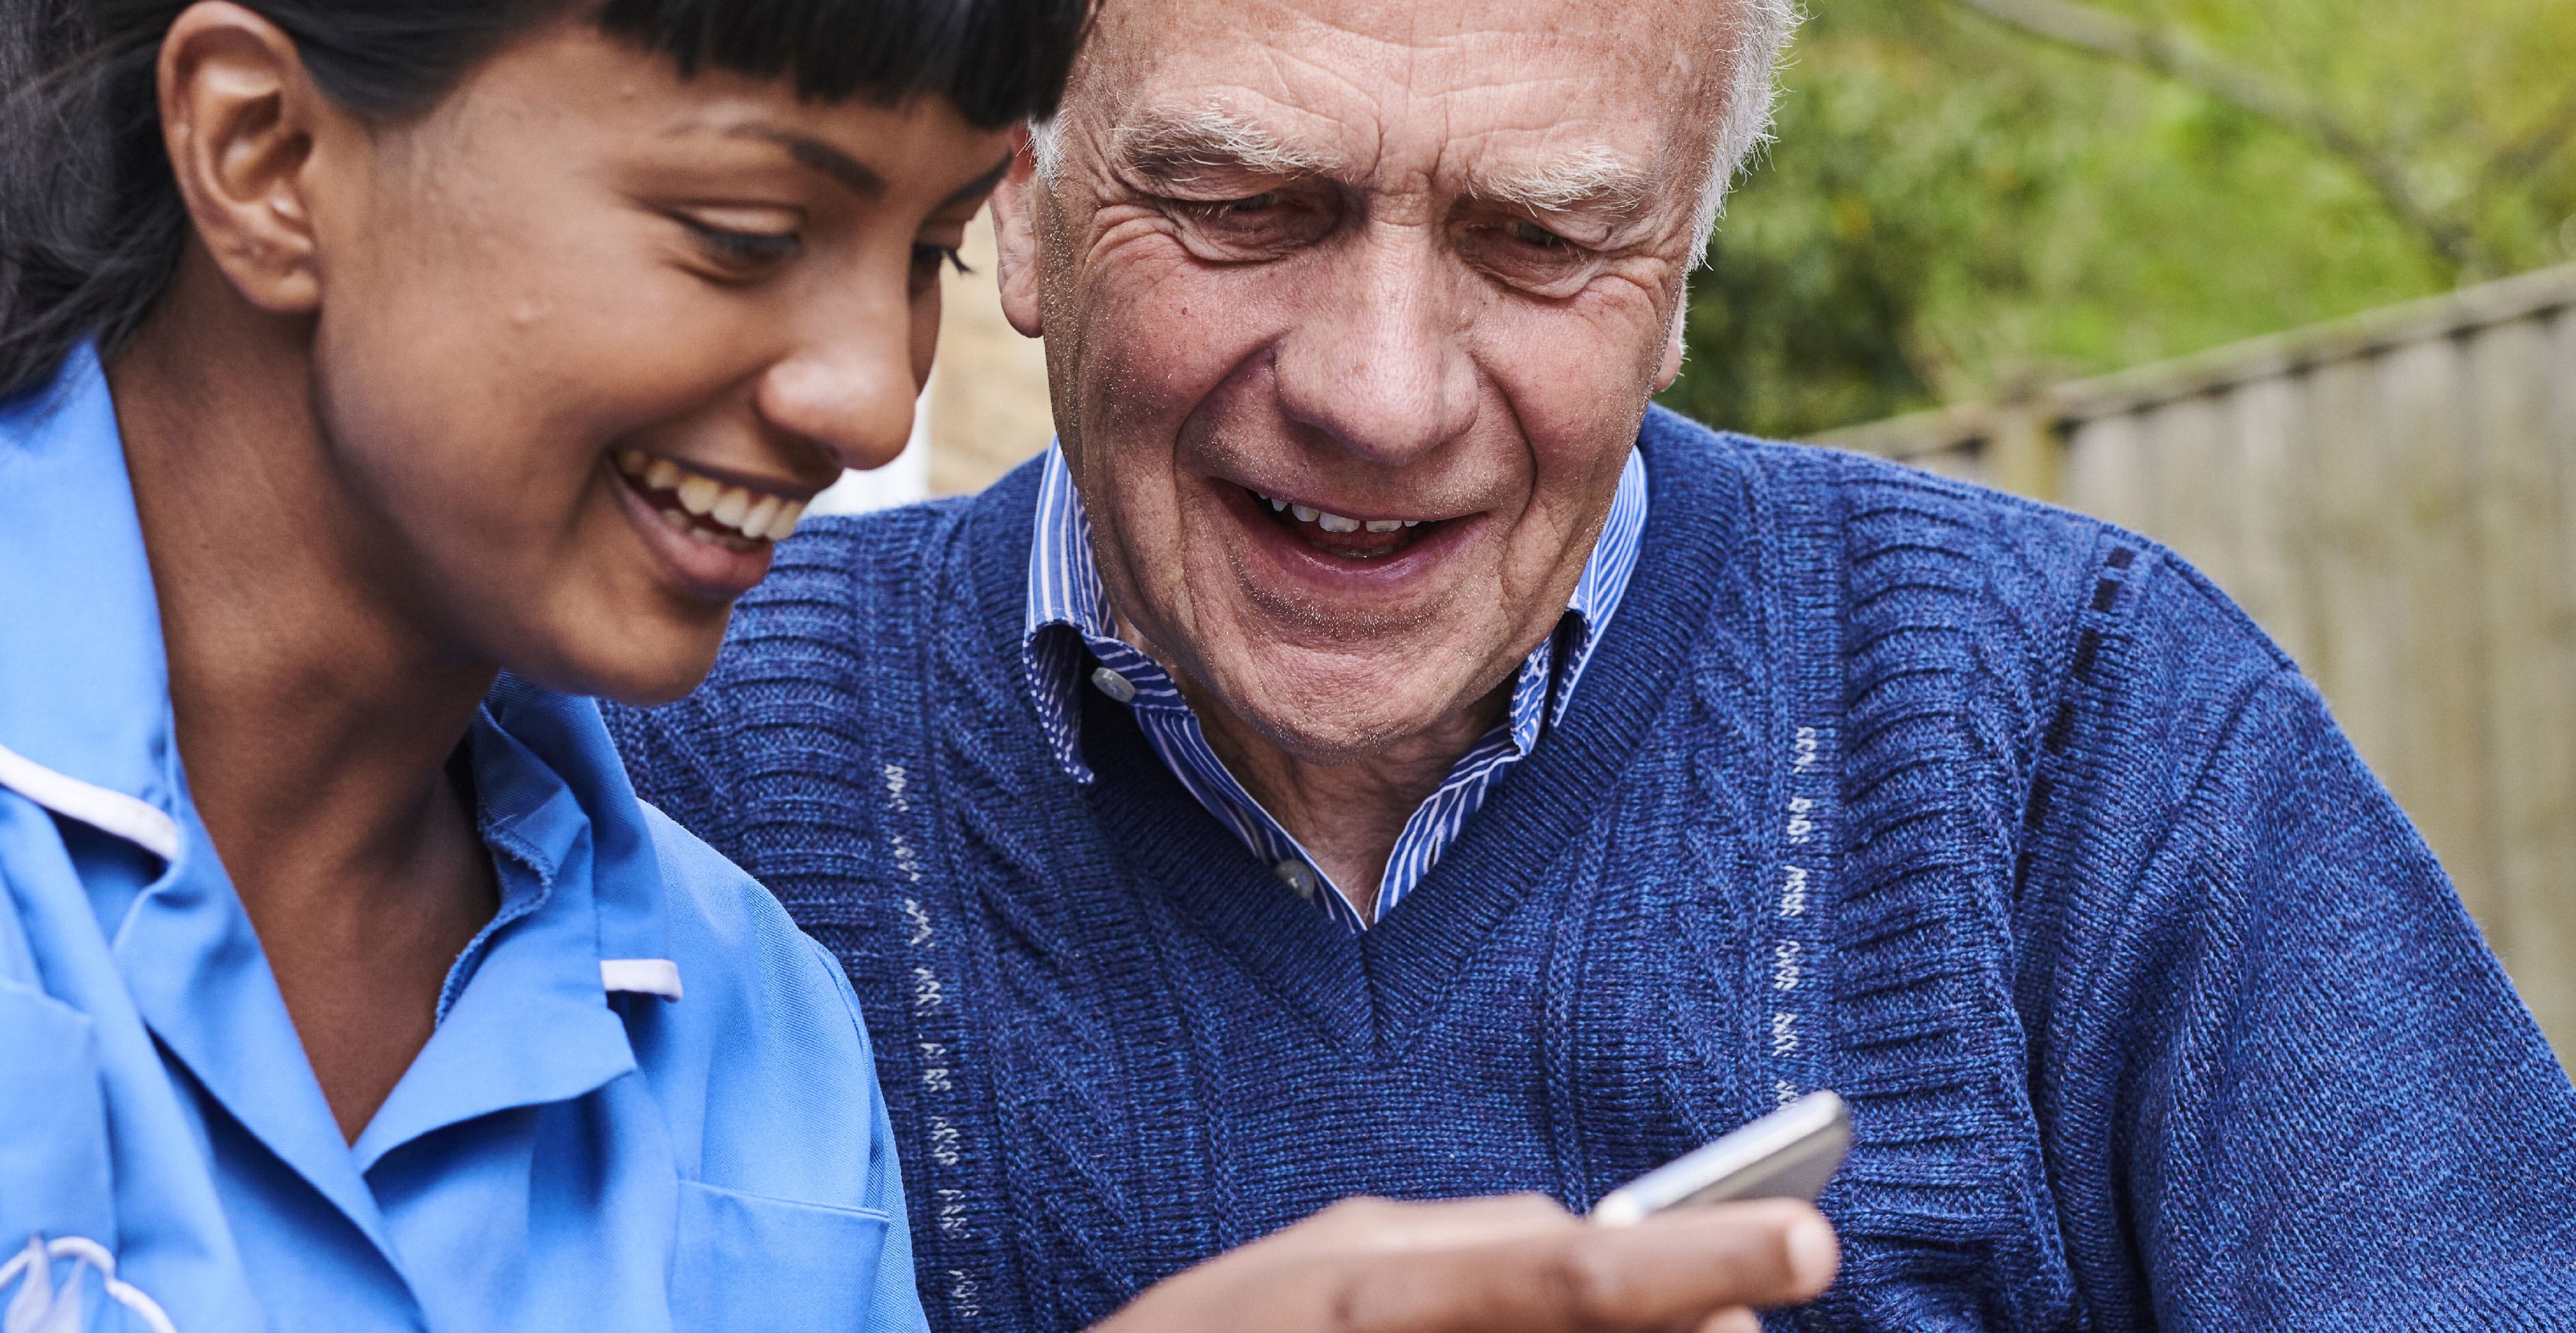 Blue Bird Care assistant showing elderly man her mobile phone